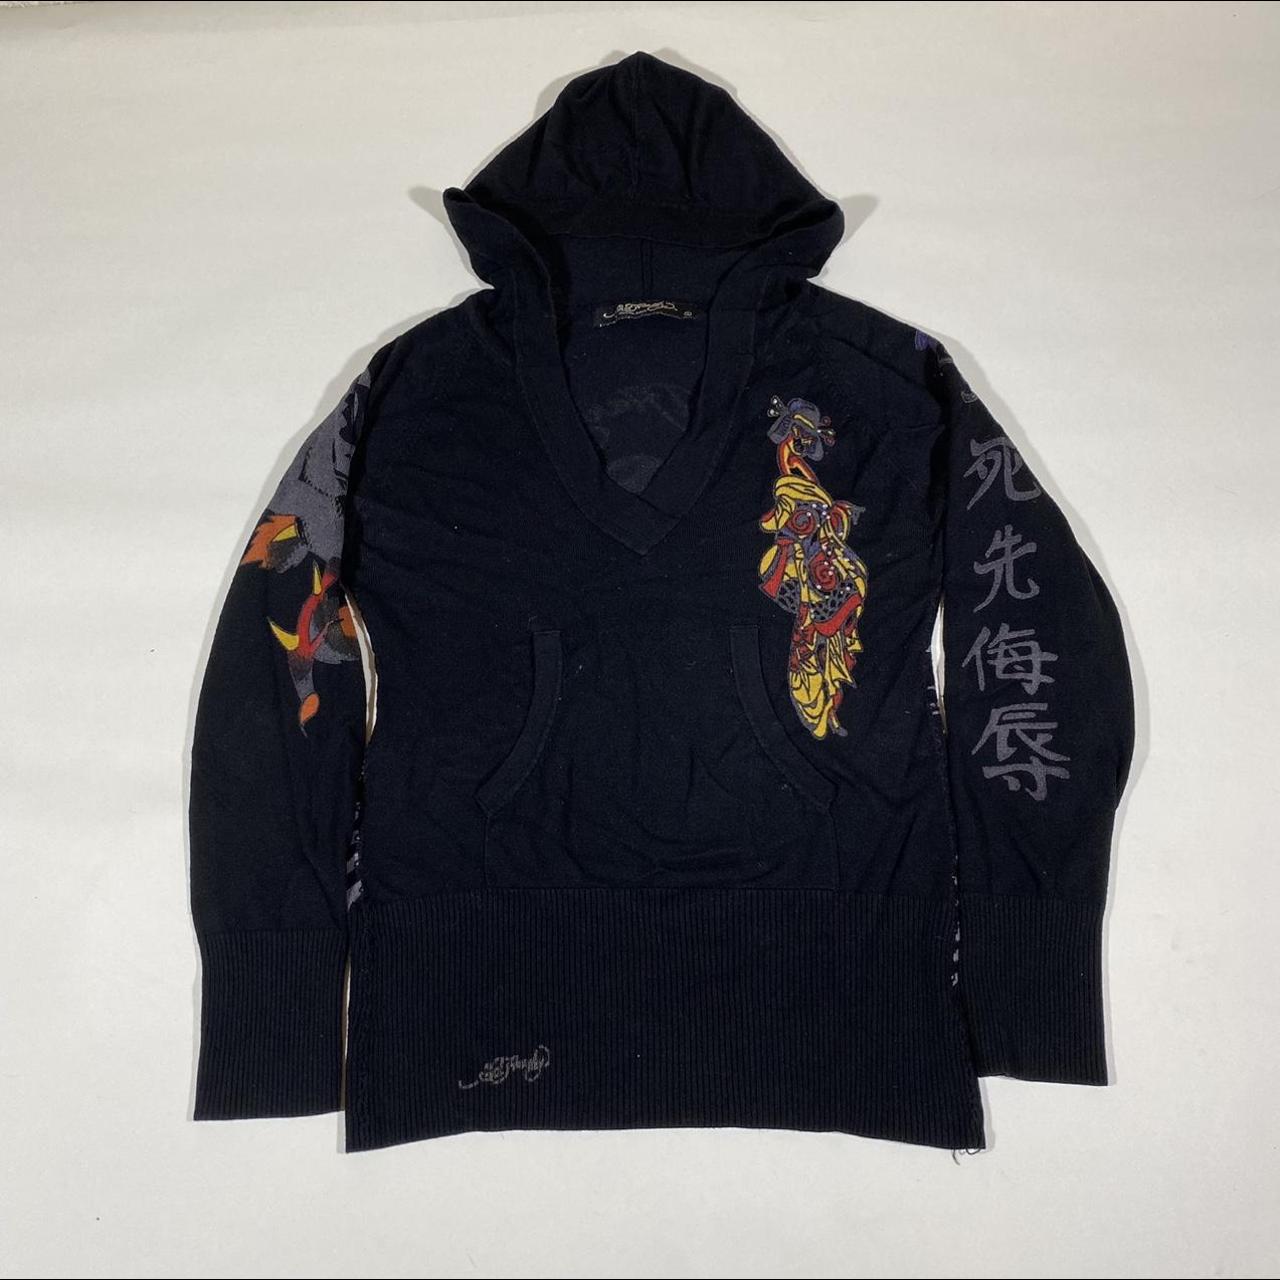 Product Image 1 - Vintage 90s Ed hardy graphic